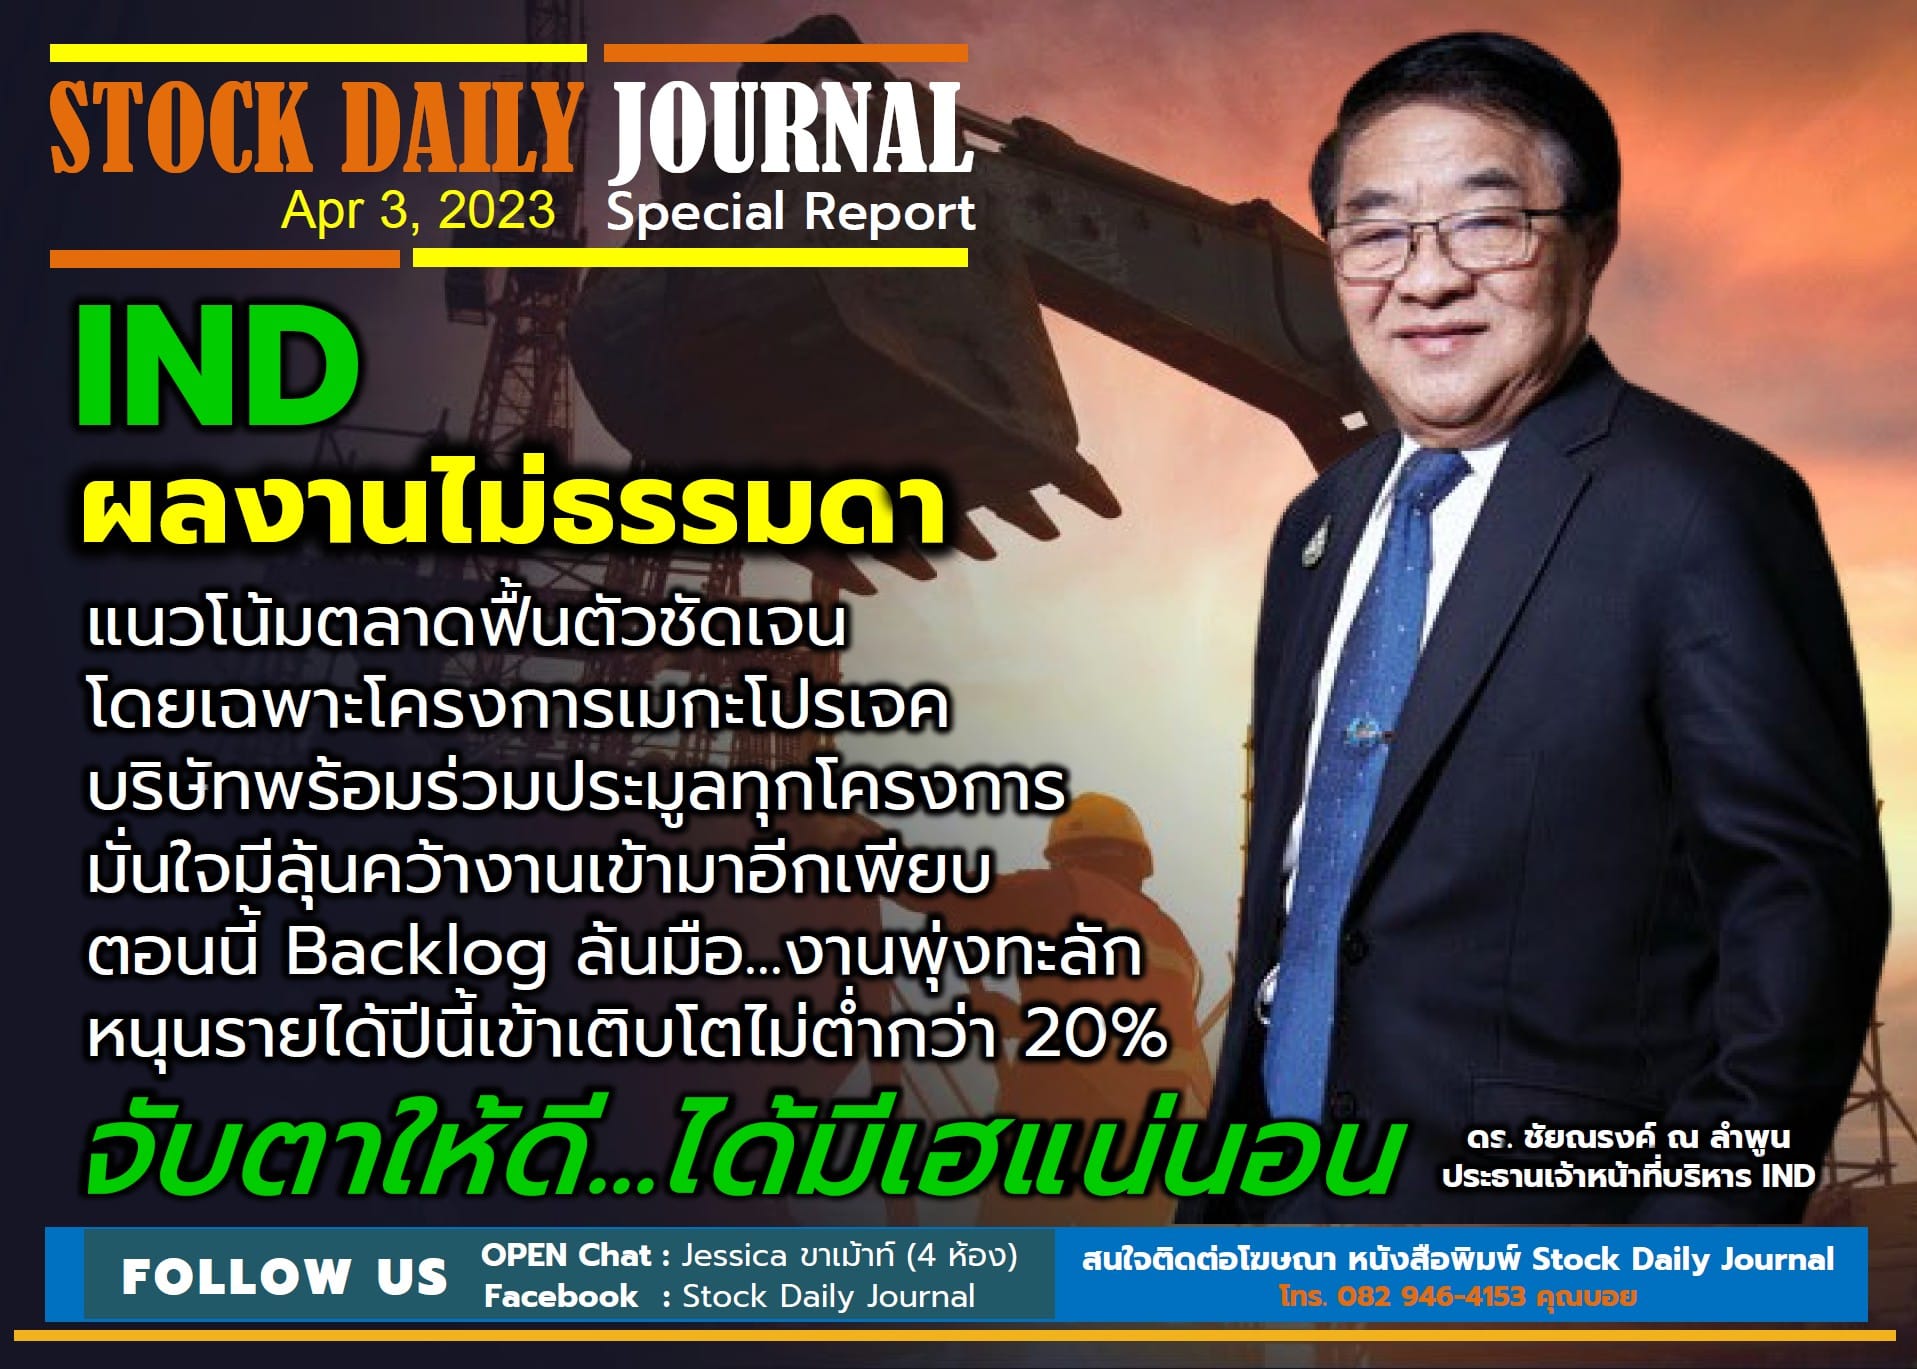 STOCK DAILY JOURNAL “Special Report : IND”